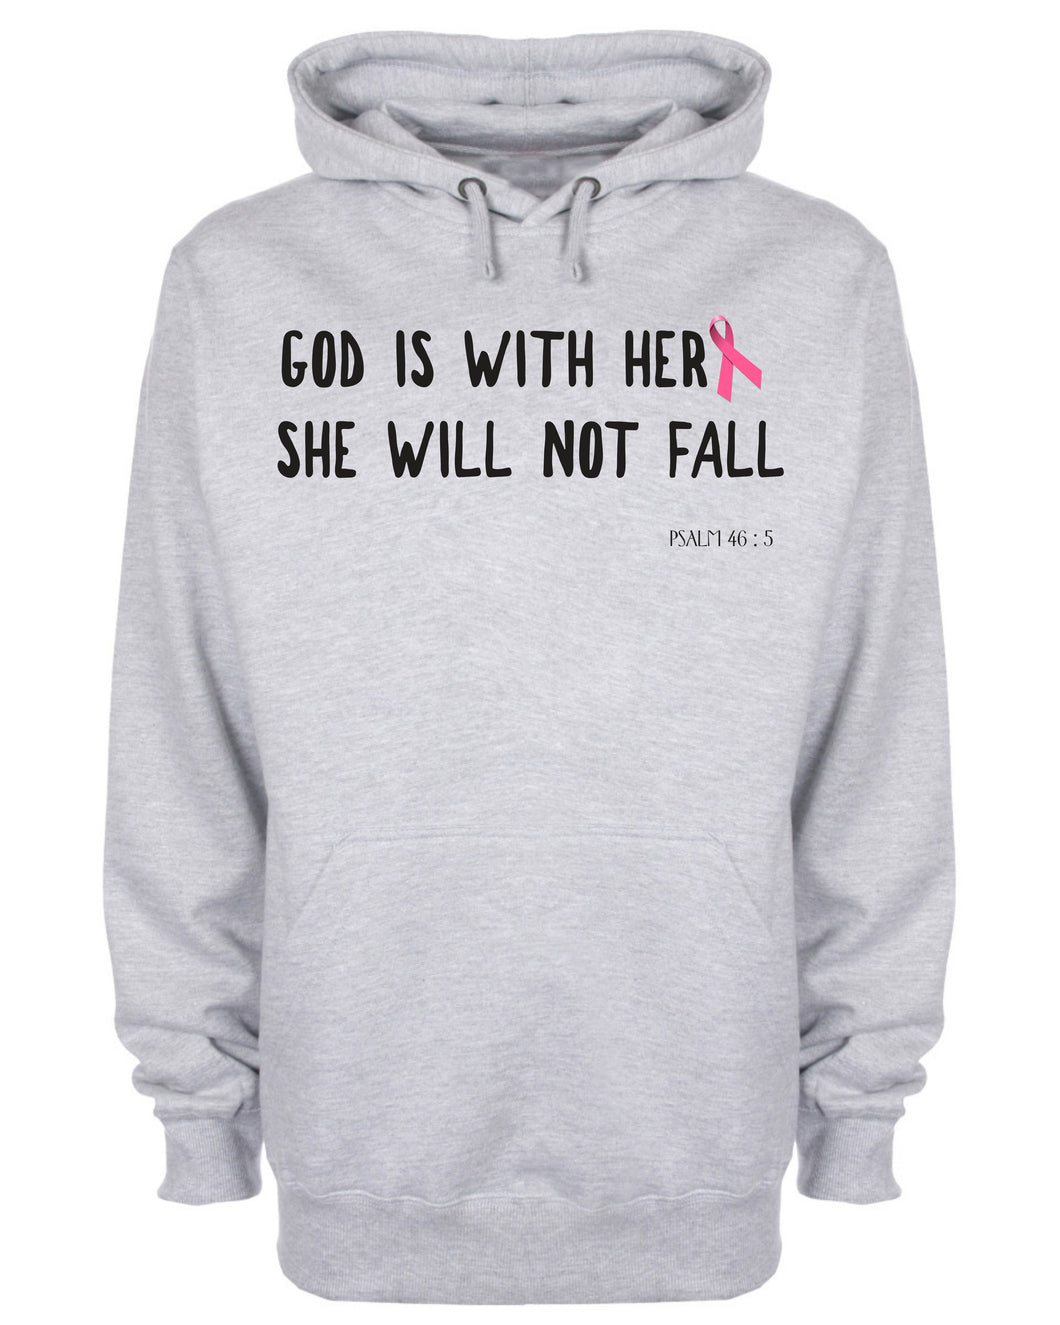 God Is With Her She Will Not Fall Hoodie Jesus Christ Religious Sweatshirt